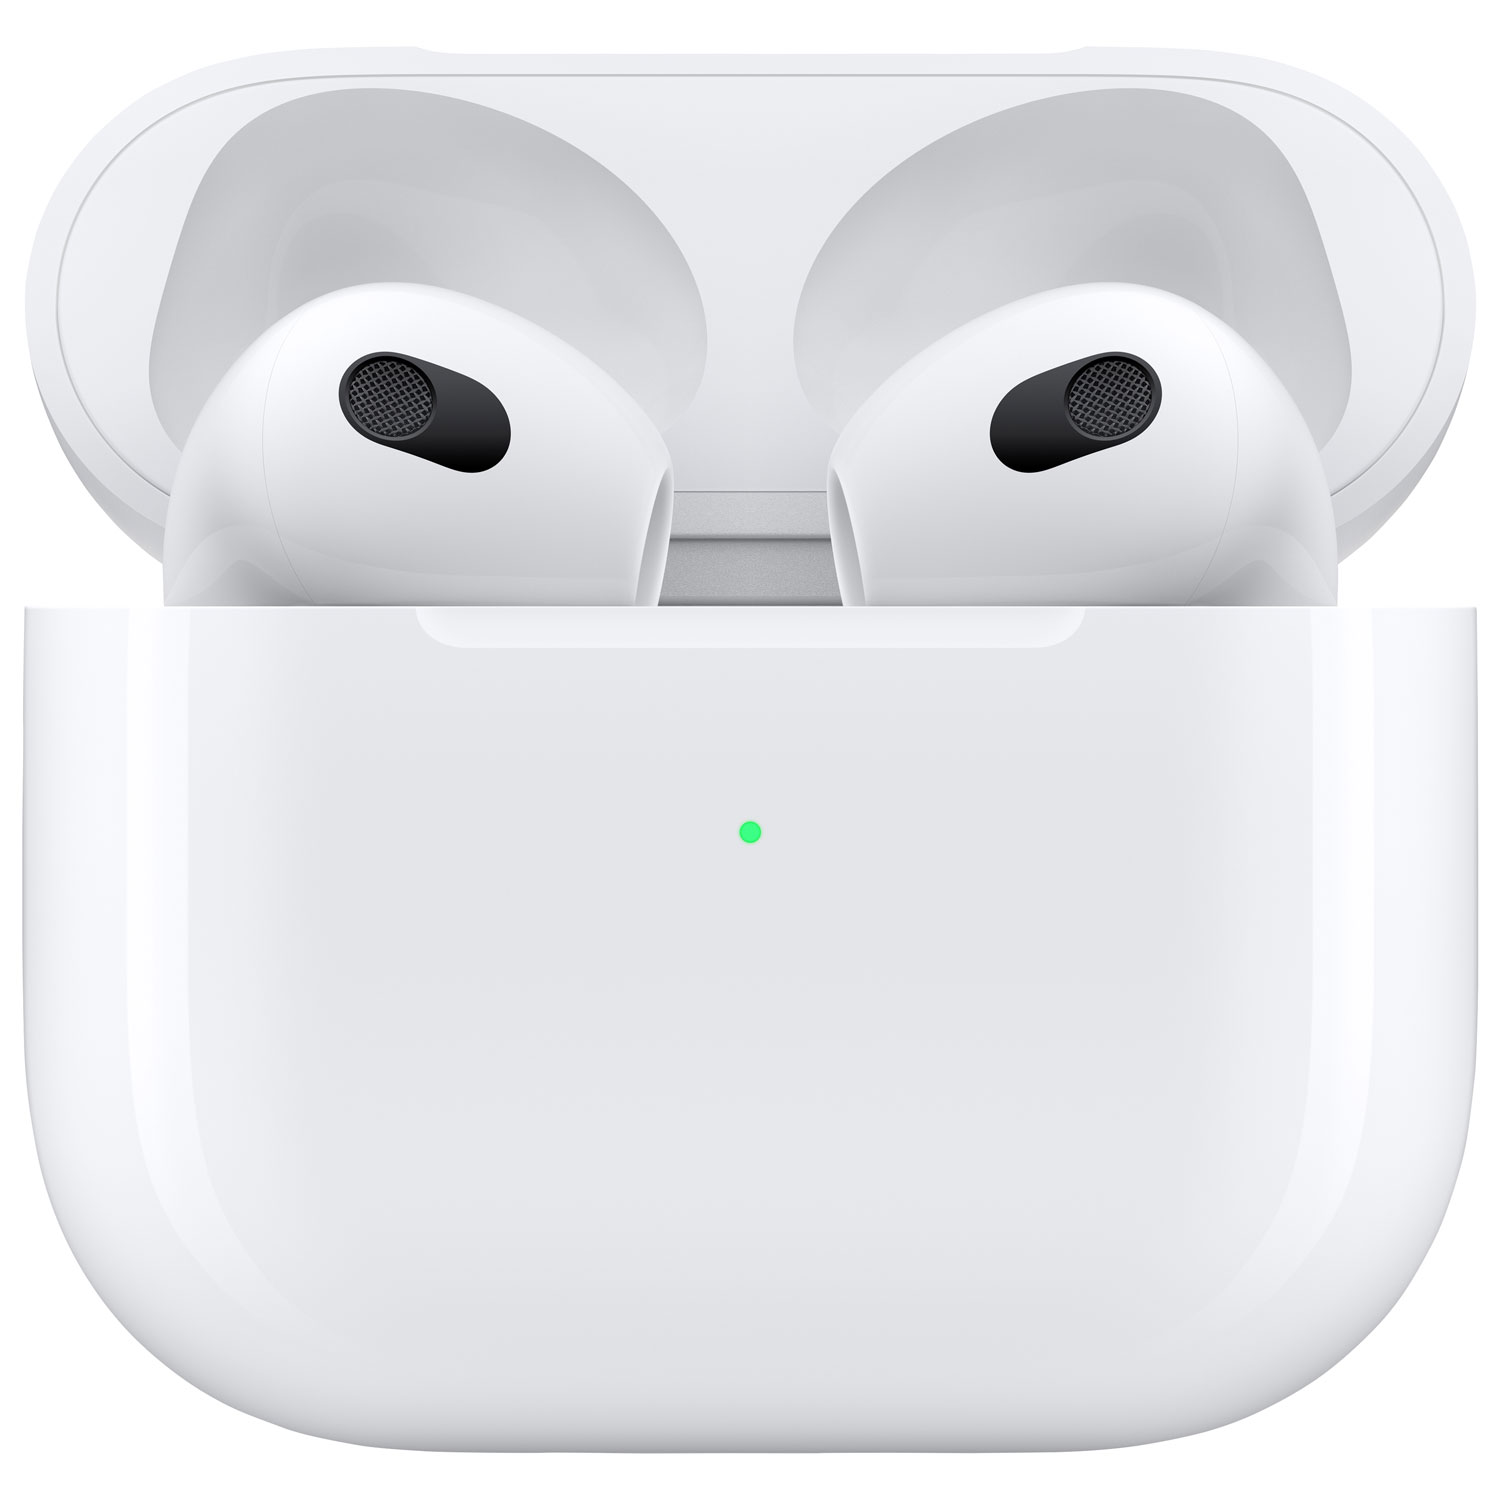 Apple AirPods (3rd generation) In-Ear Truly Wireless Headphones with MagSafe Charging Case - White